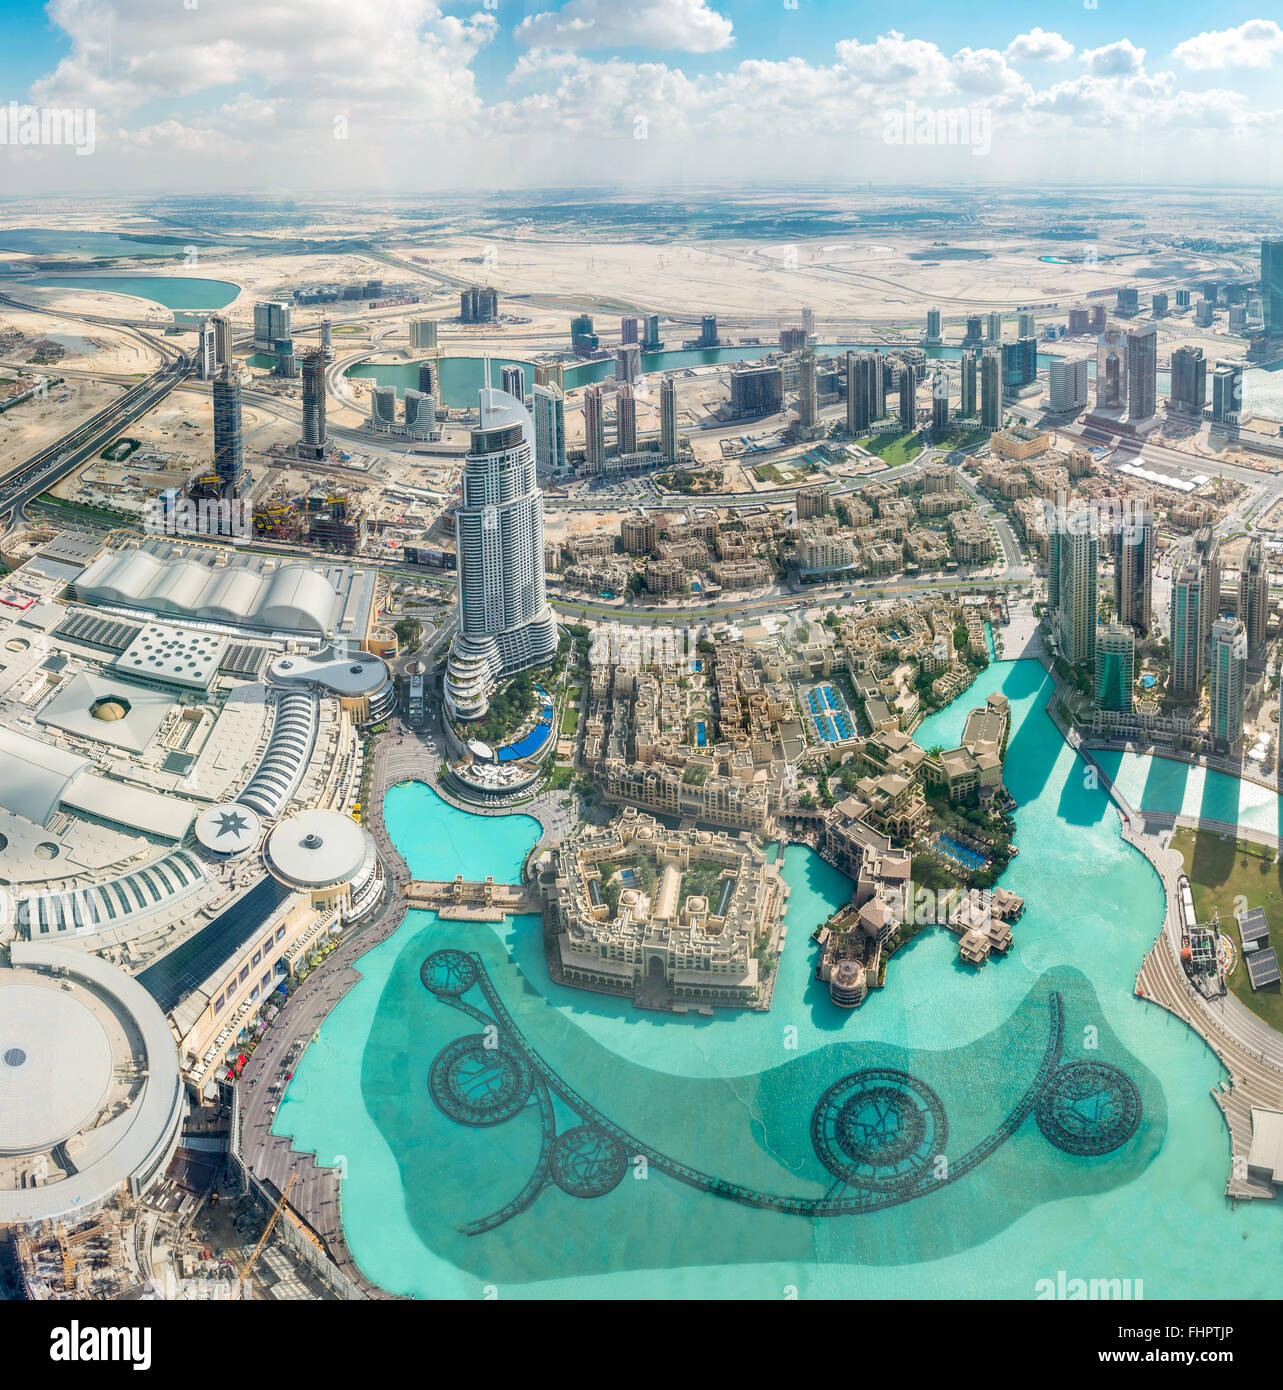 Dubai, United Arab Emirates - Dec 2, 2014: Aerial shot of Dubai including The Address hotel, which will be closed indefinitely a Stock Photo